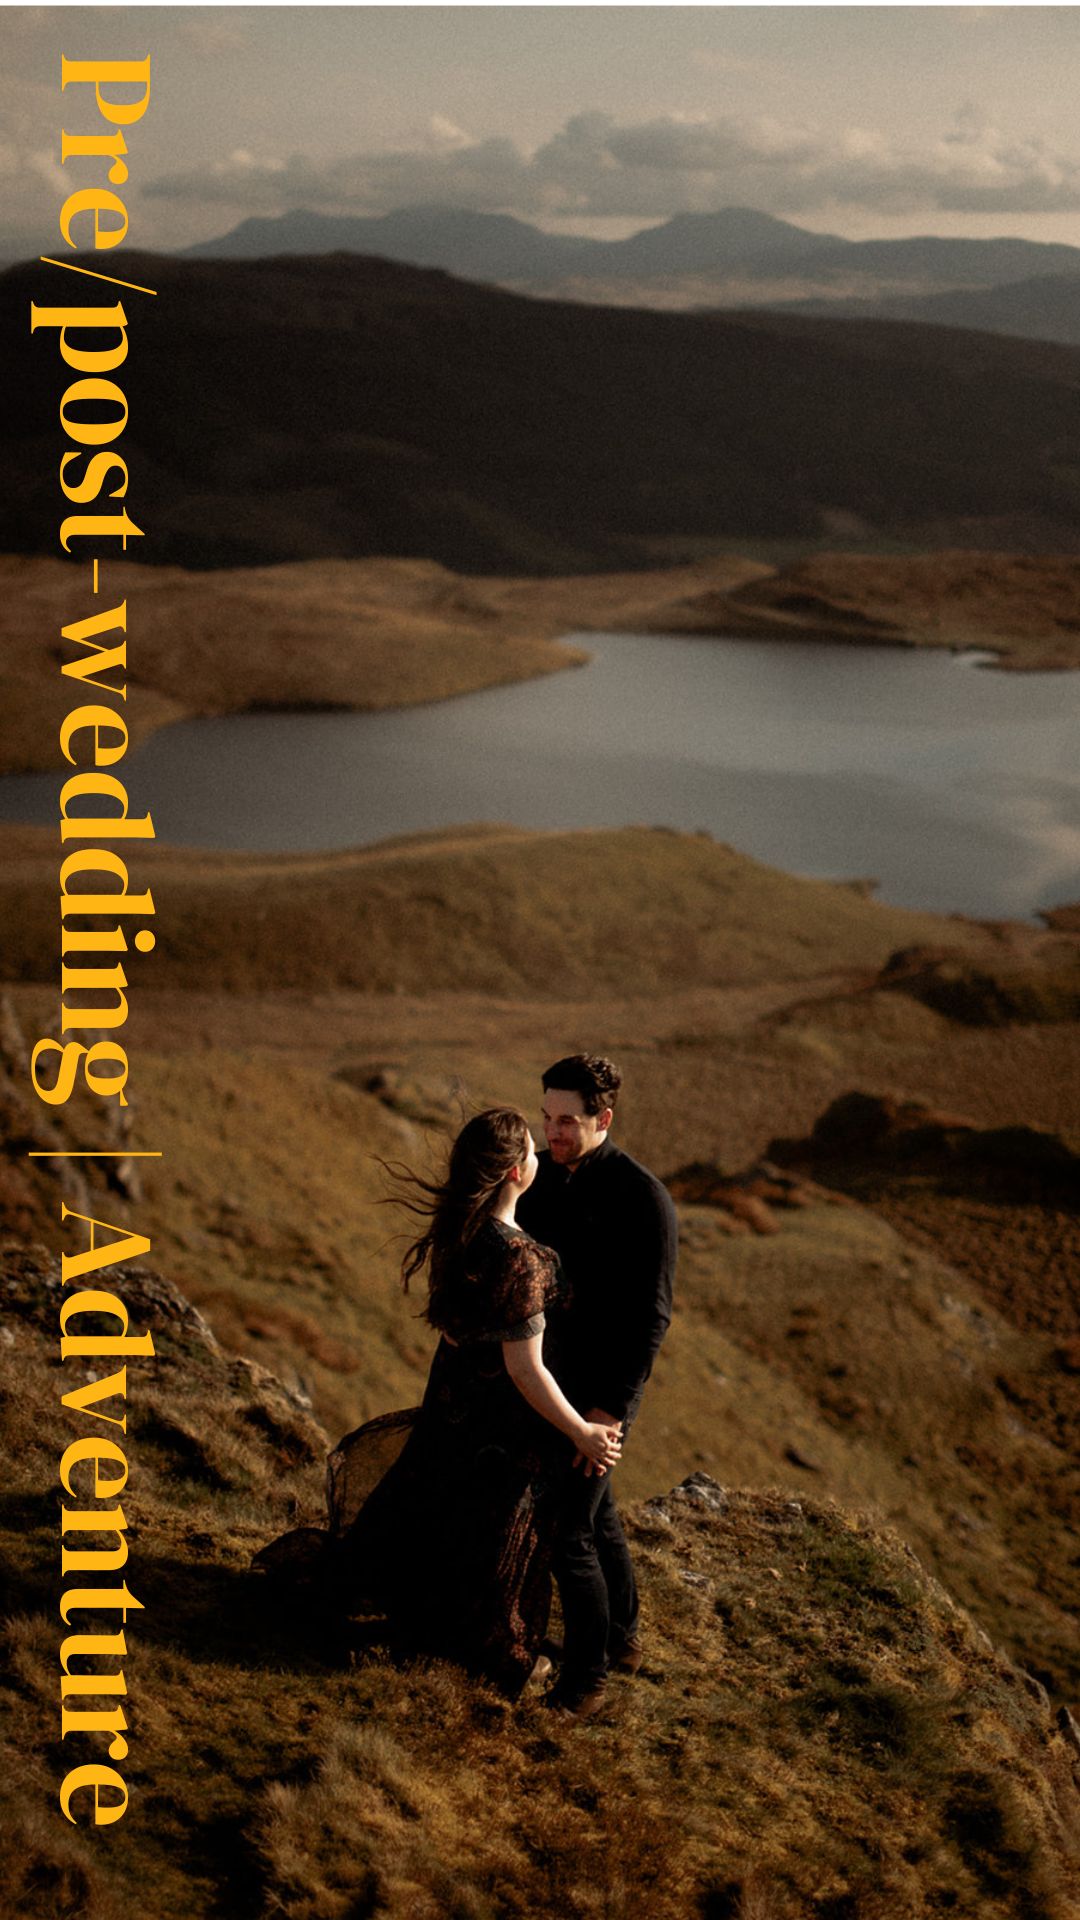 pre-wedding, post-wedding and adventure couple photography in North Wales